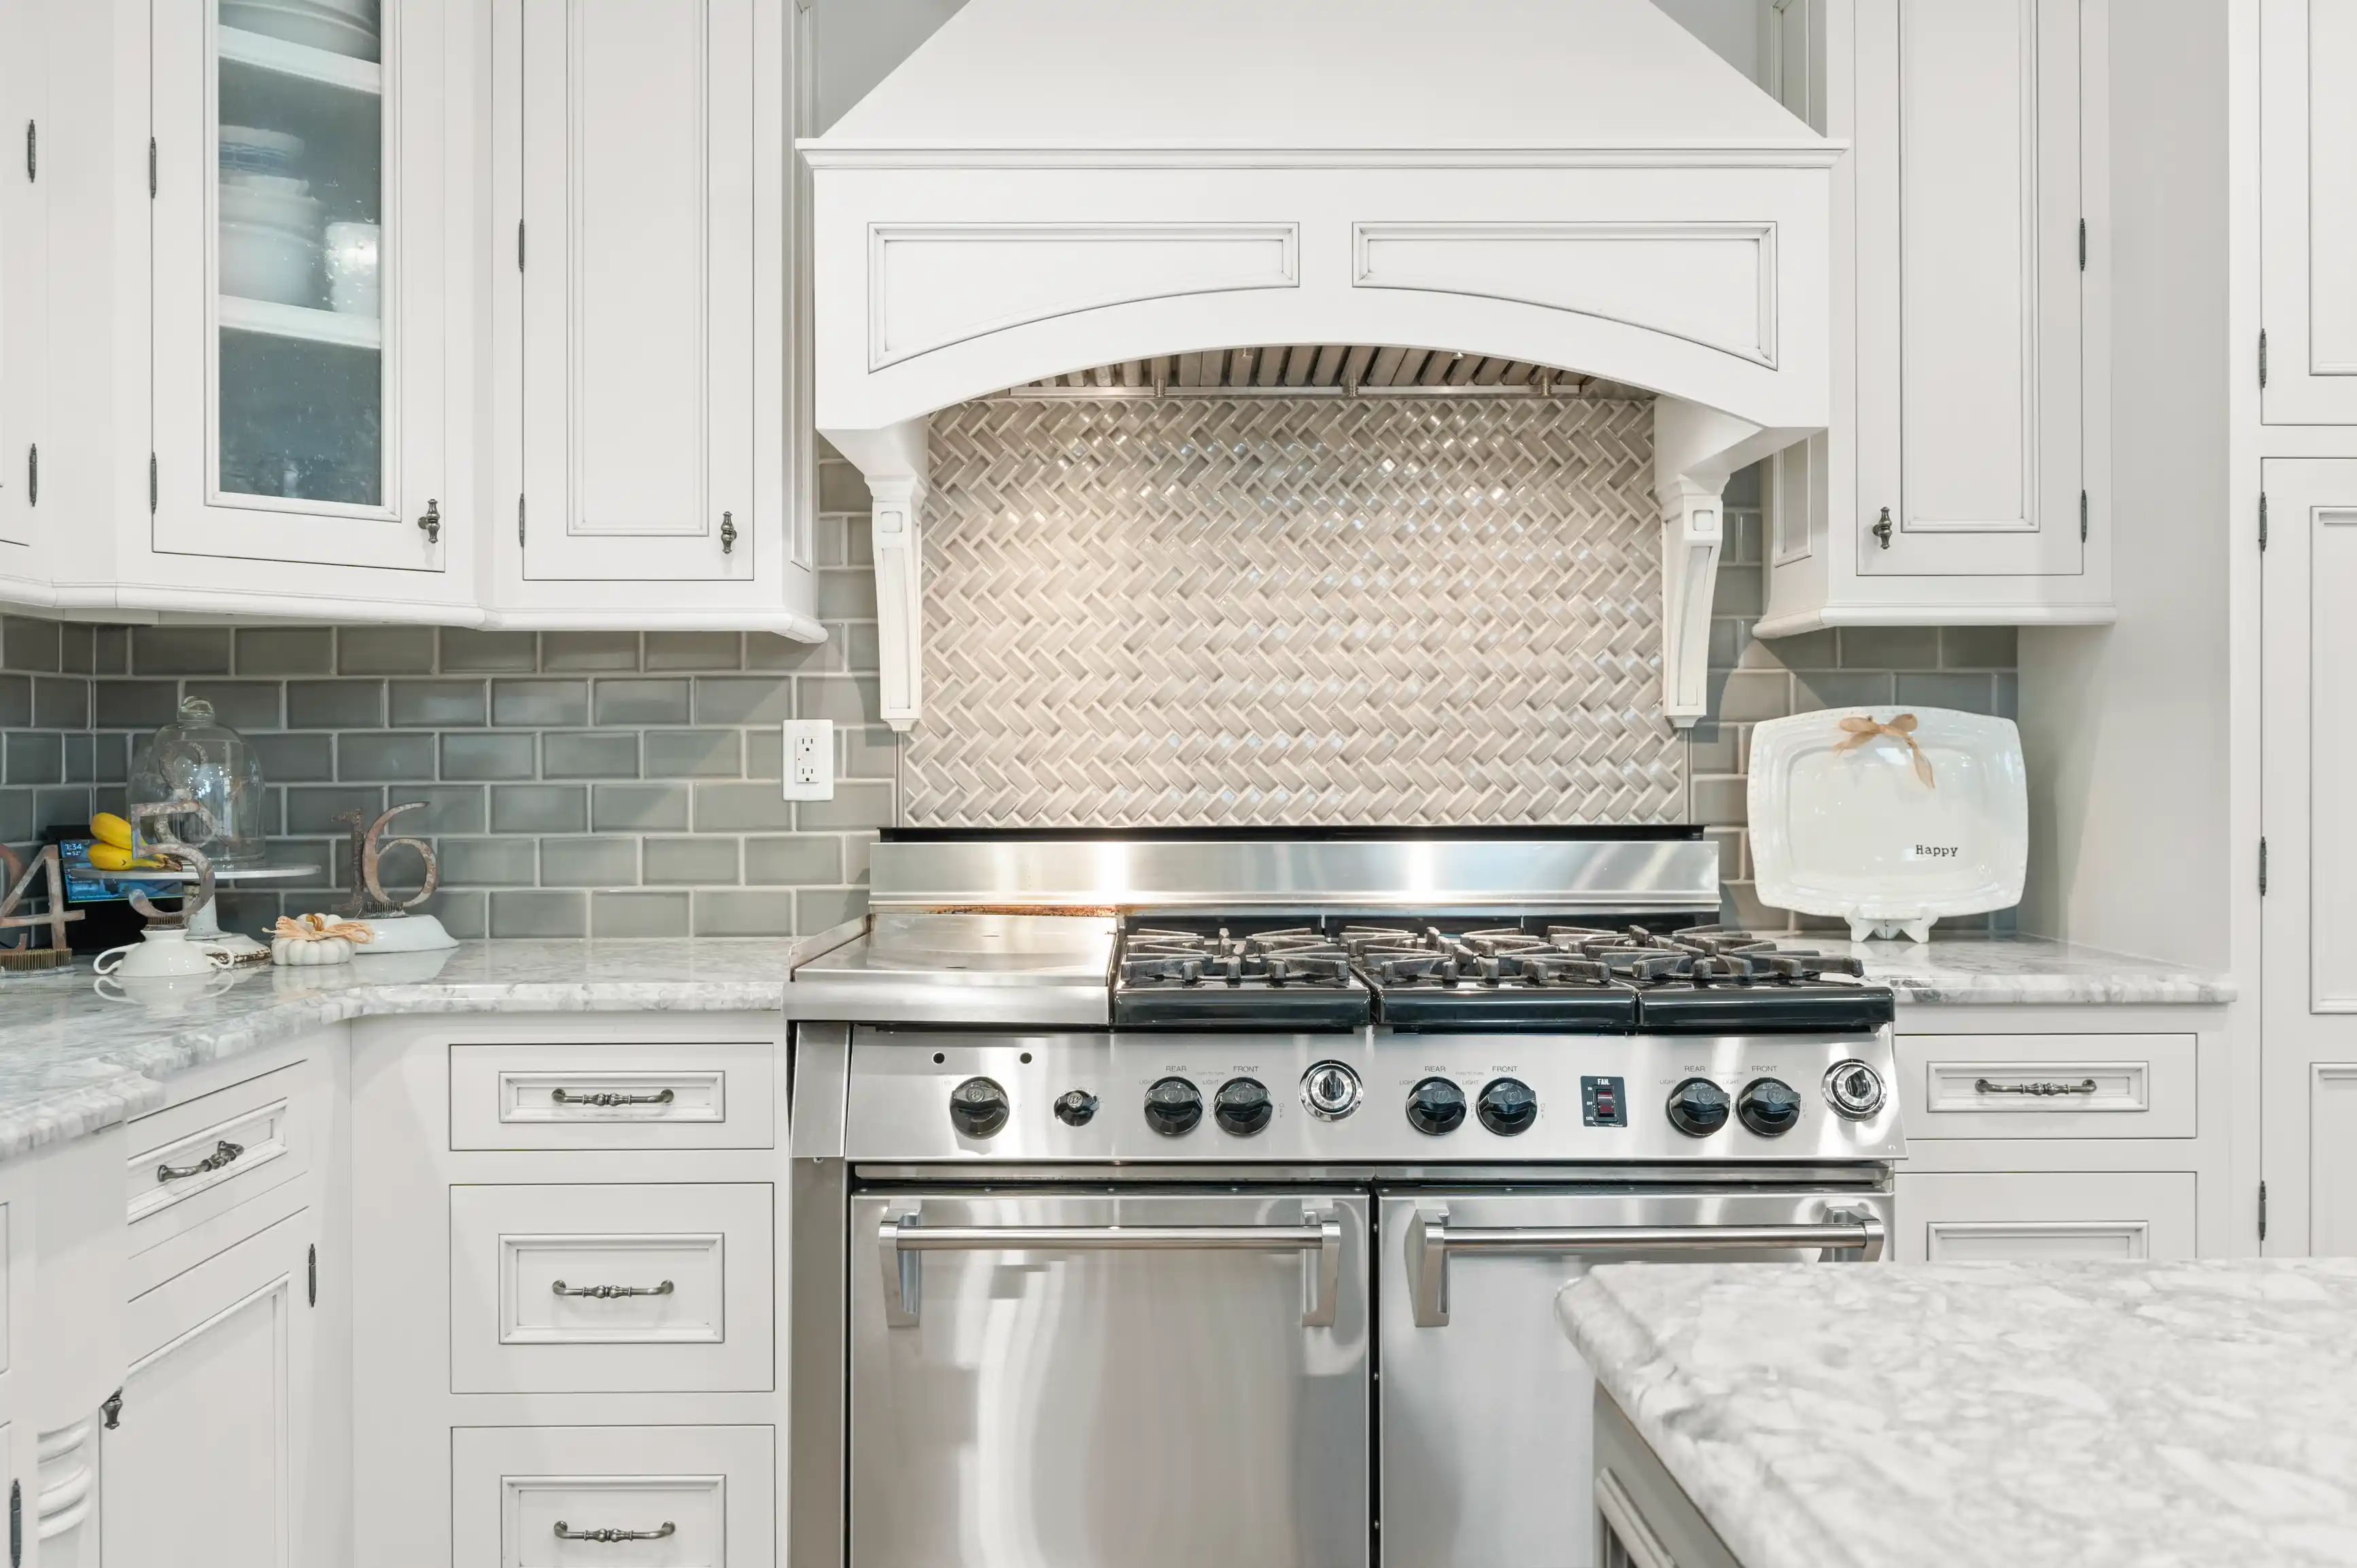 Modern kitchen with stainless steel gas stove, white cabinetry, and gray subway tile backsplash.